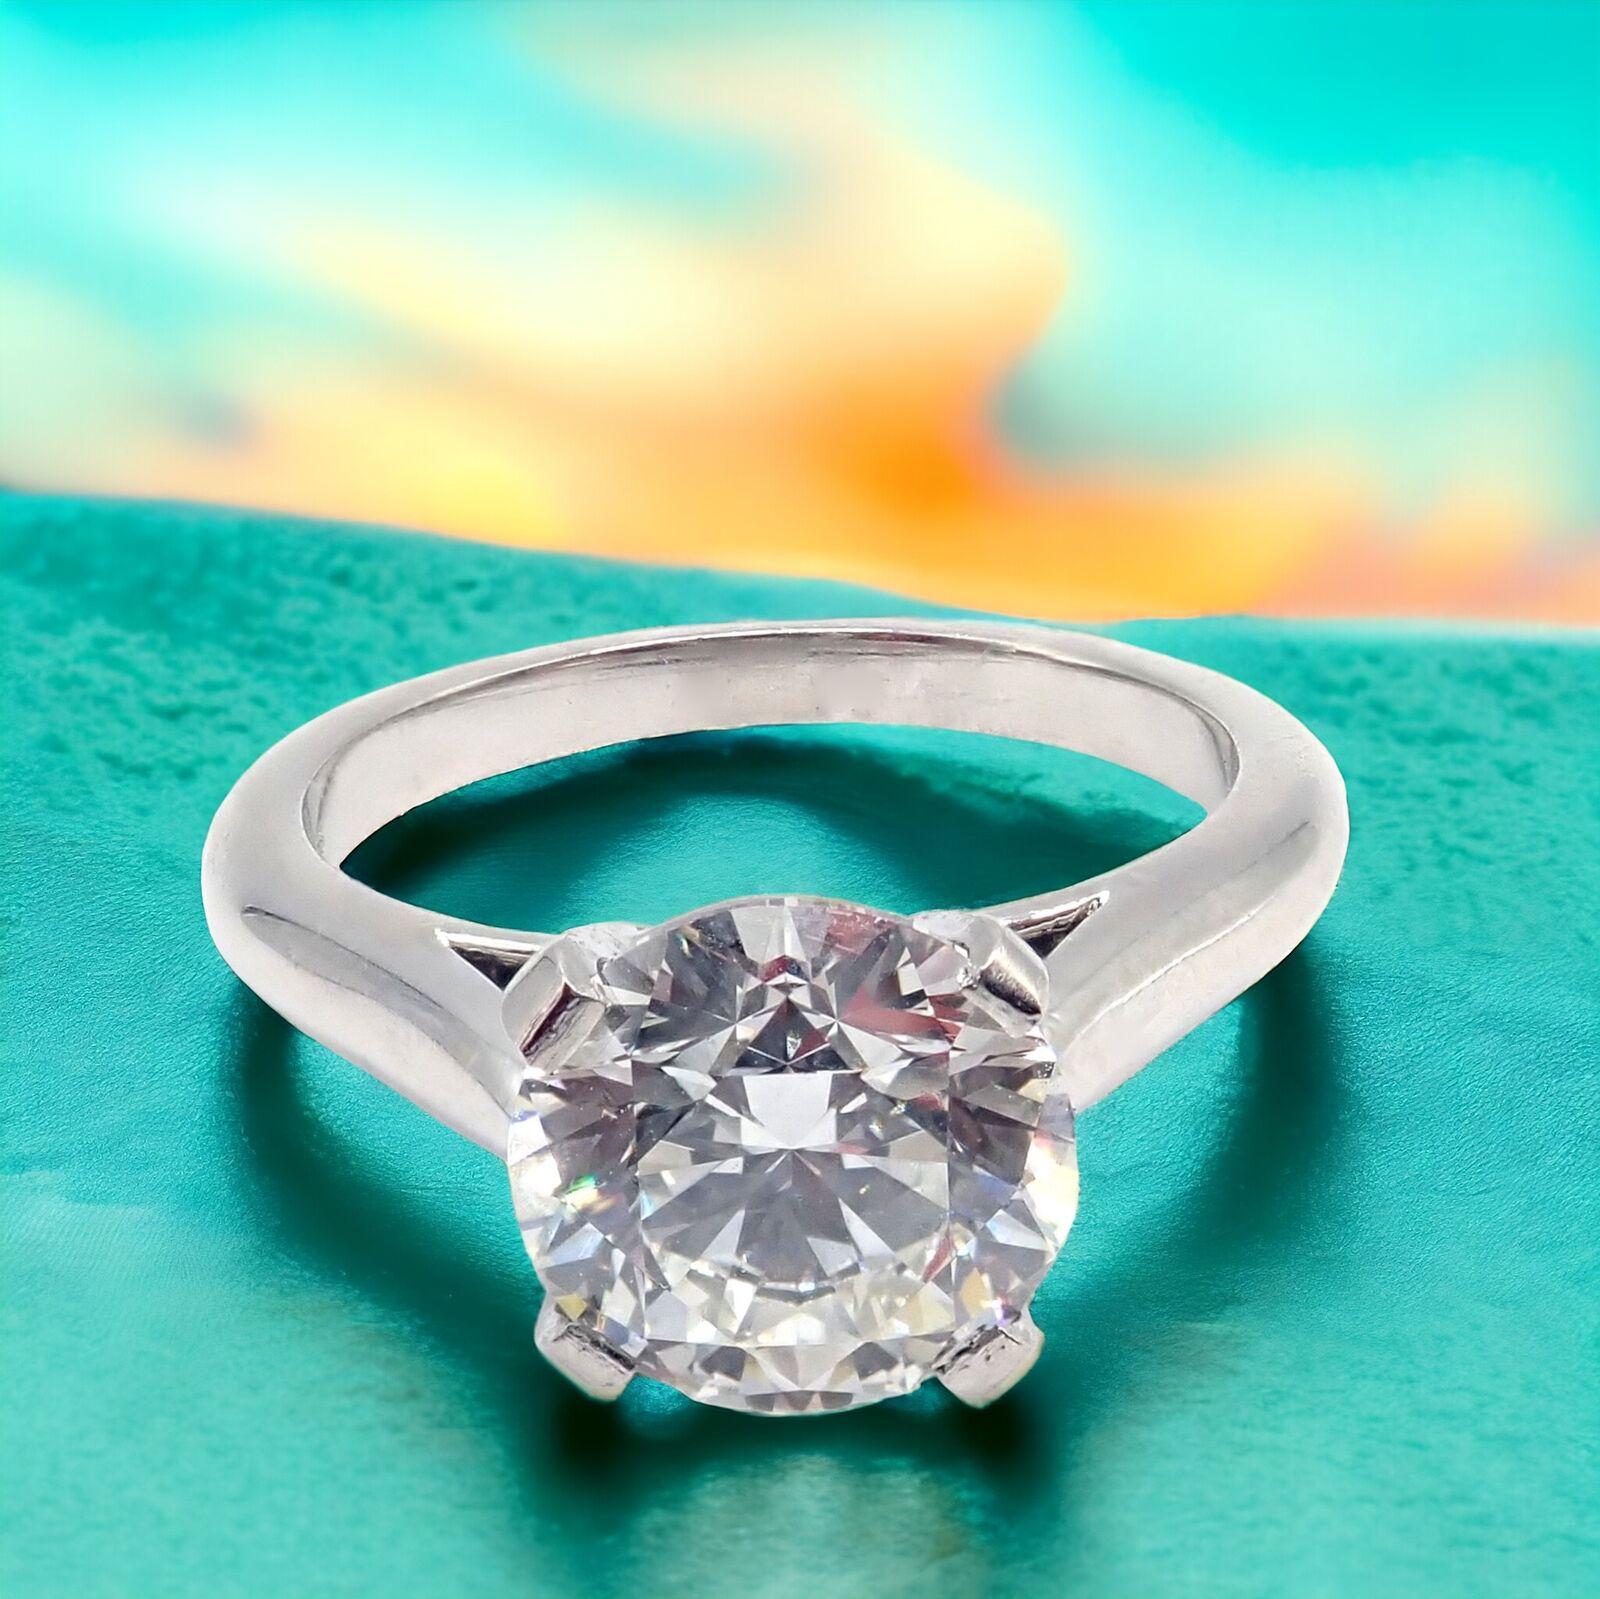 Platinum 1.70ct Diamond Engagement Solitaire Ring by Cartier. 
An authentic Cartier engagement ring, crafted from premium platinum, showcases a stunning 1.70-carat diamond with an impressive VVS1 clarity and H color grade. 
This solitaire ring